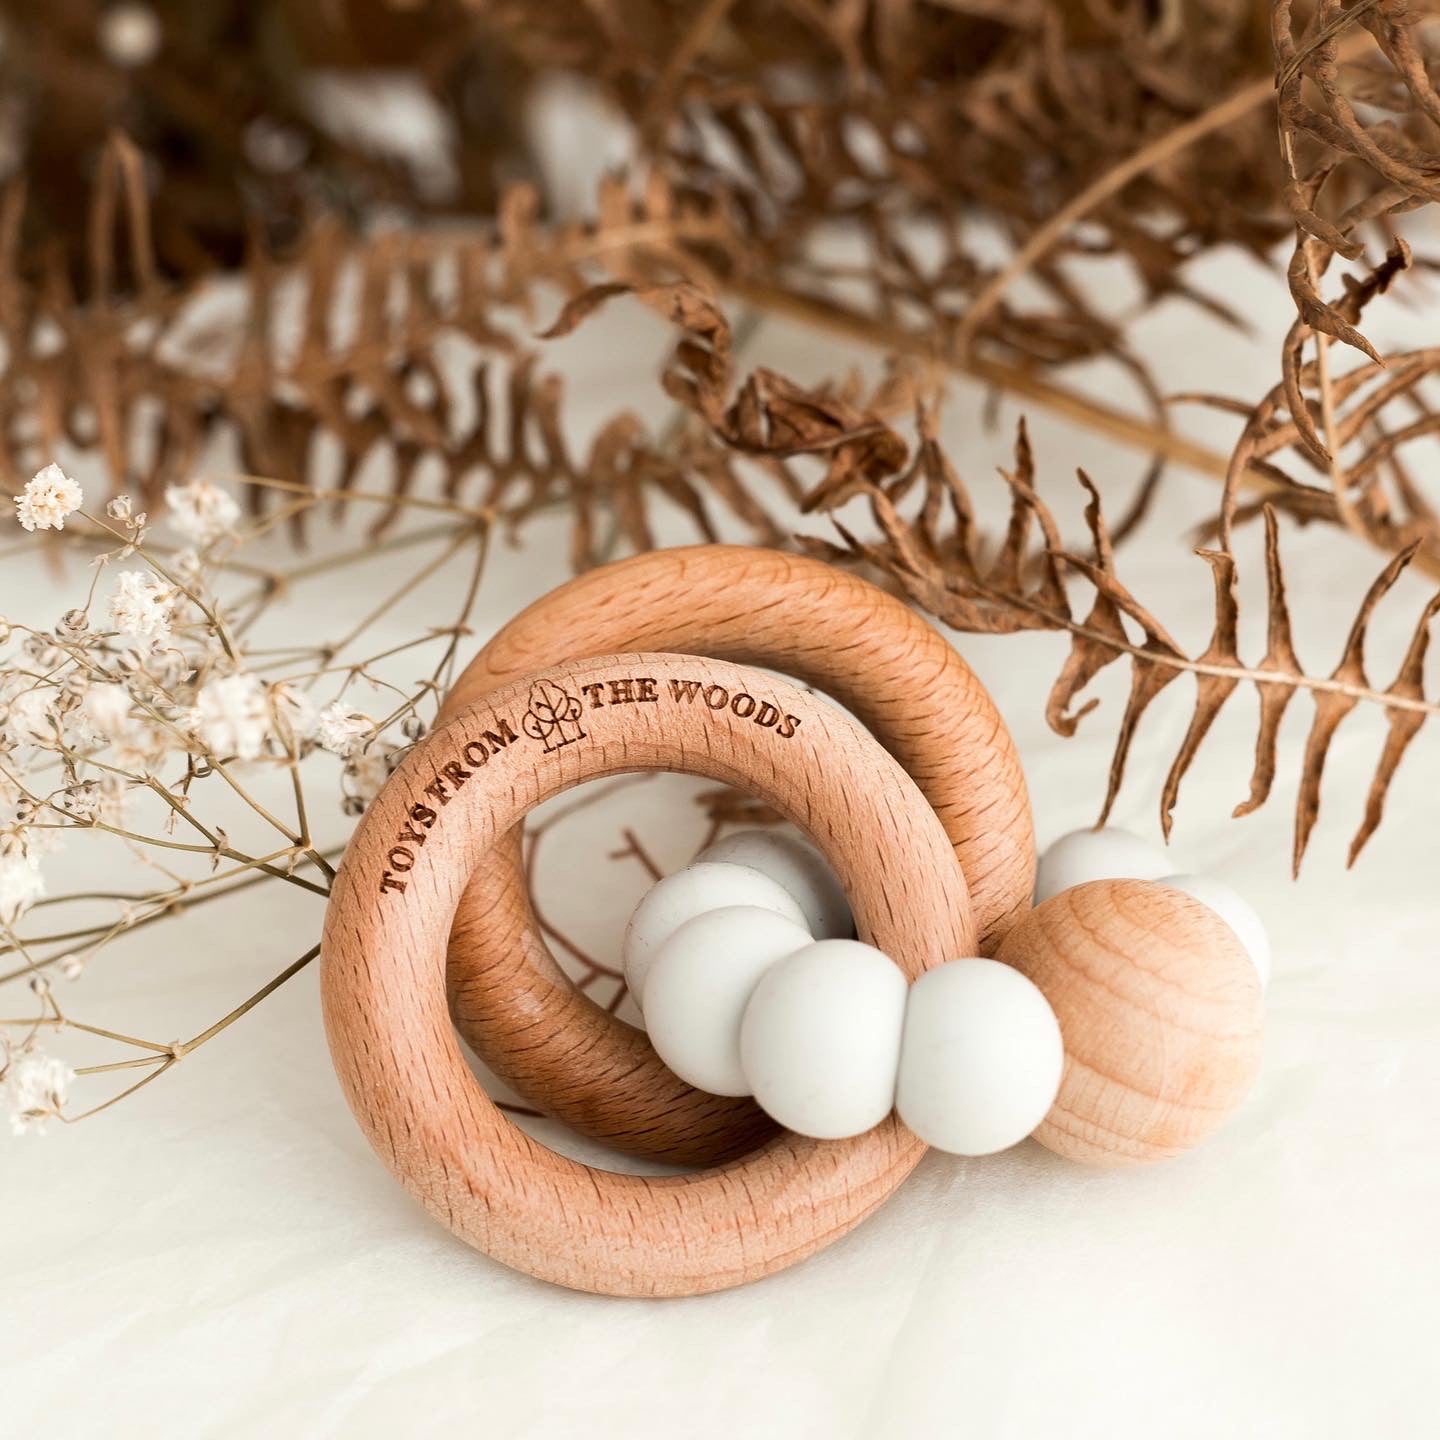 Wooden Baby Rattle Teether